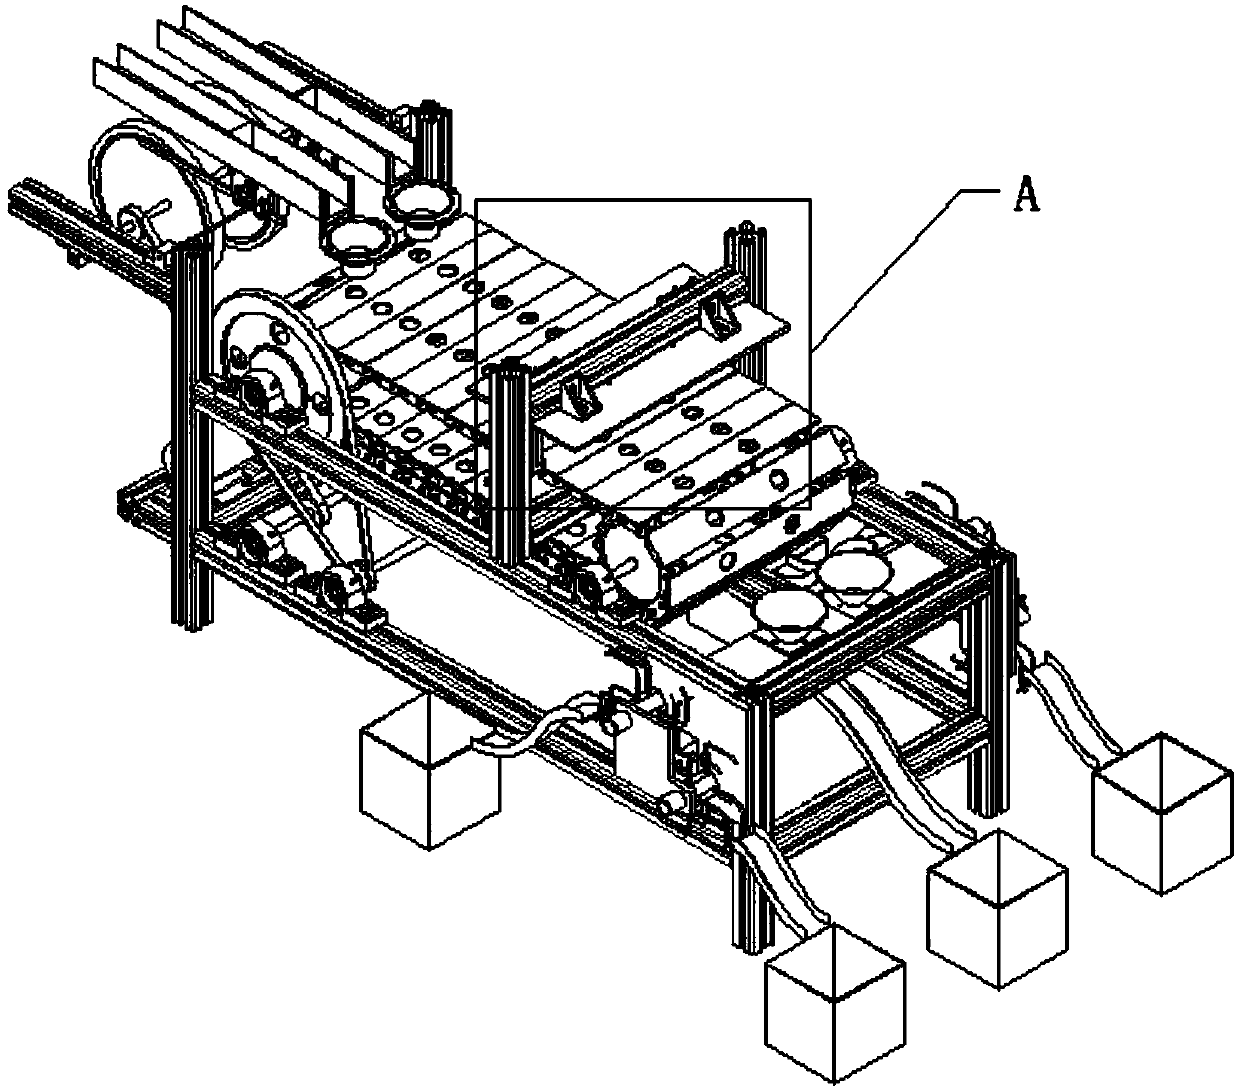 A sorting visual inspection and grading machine